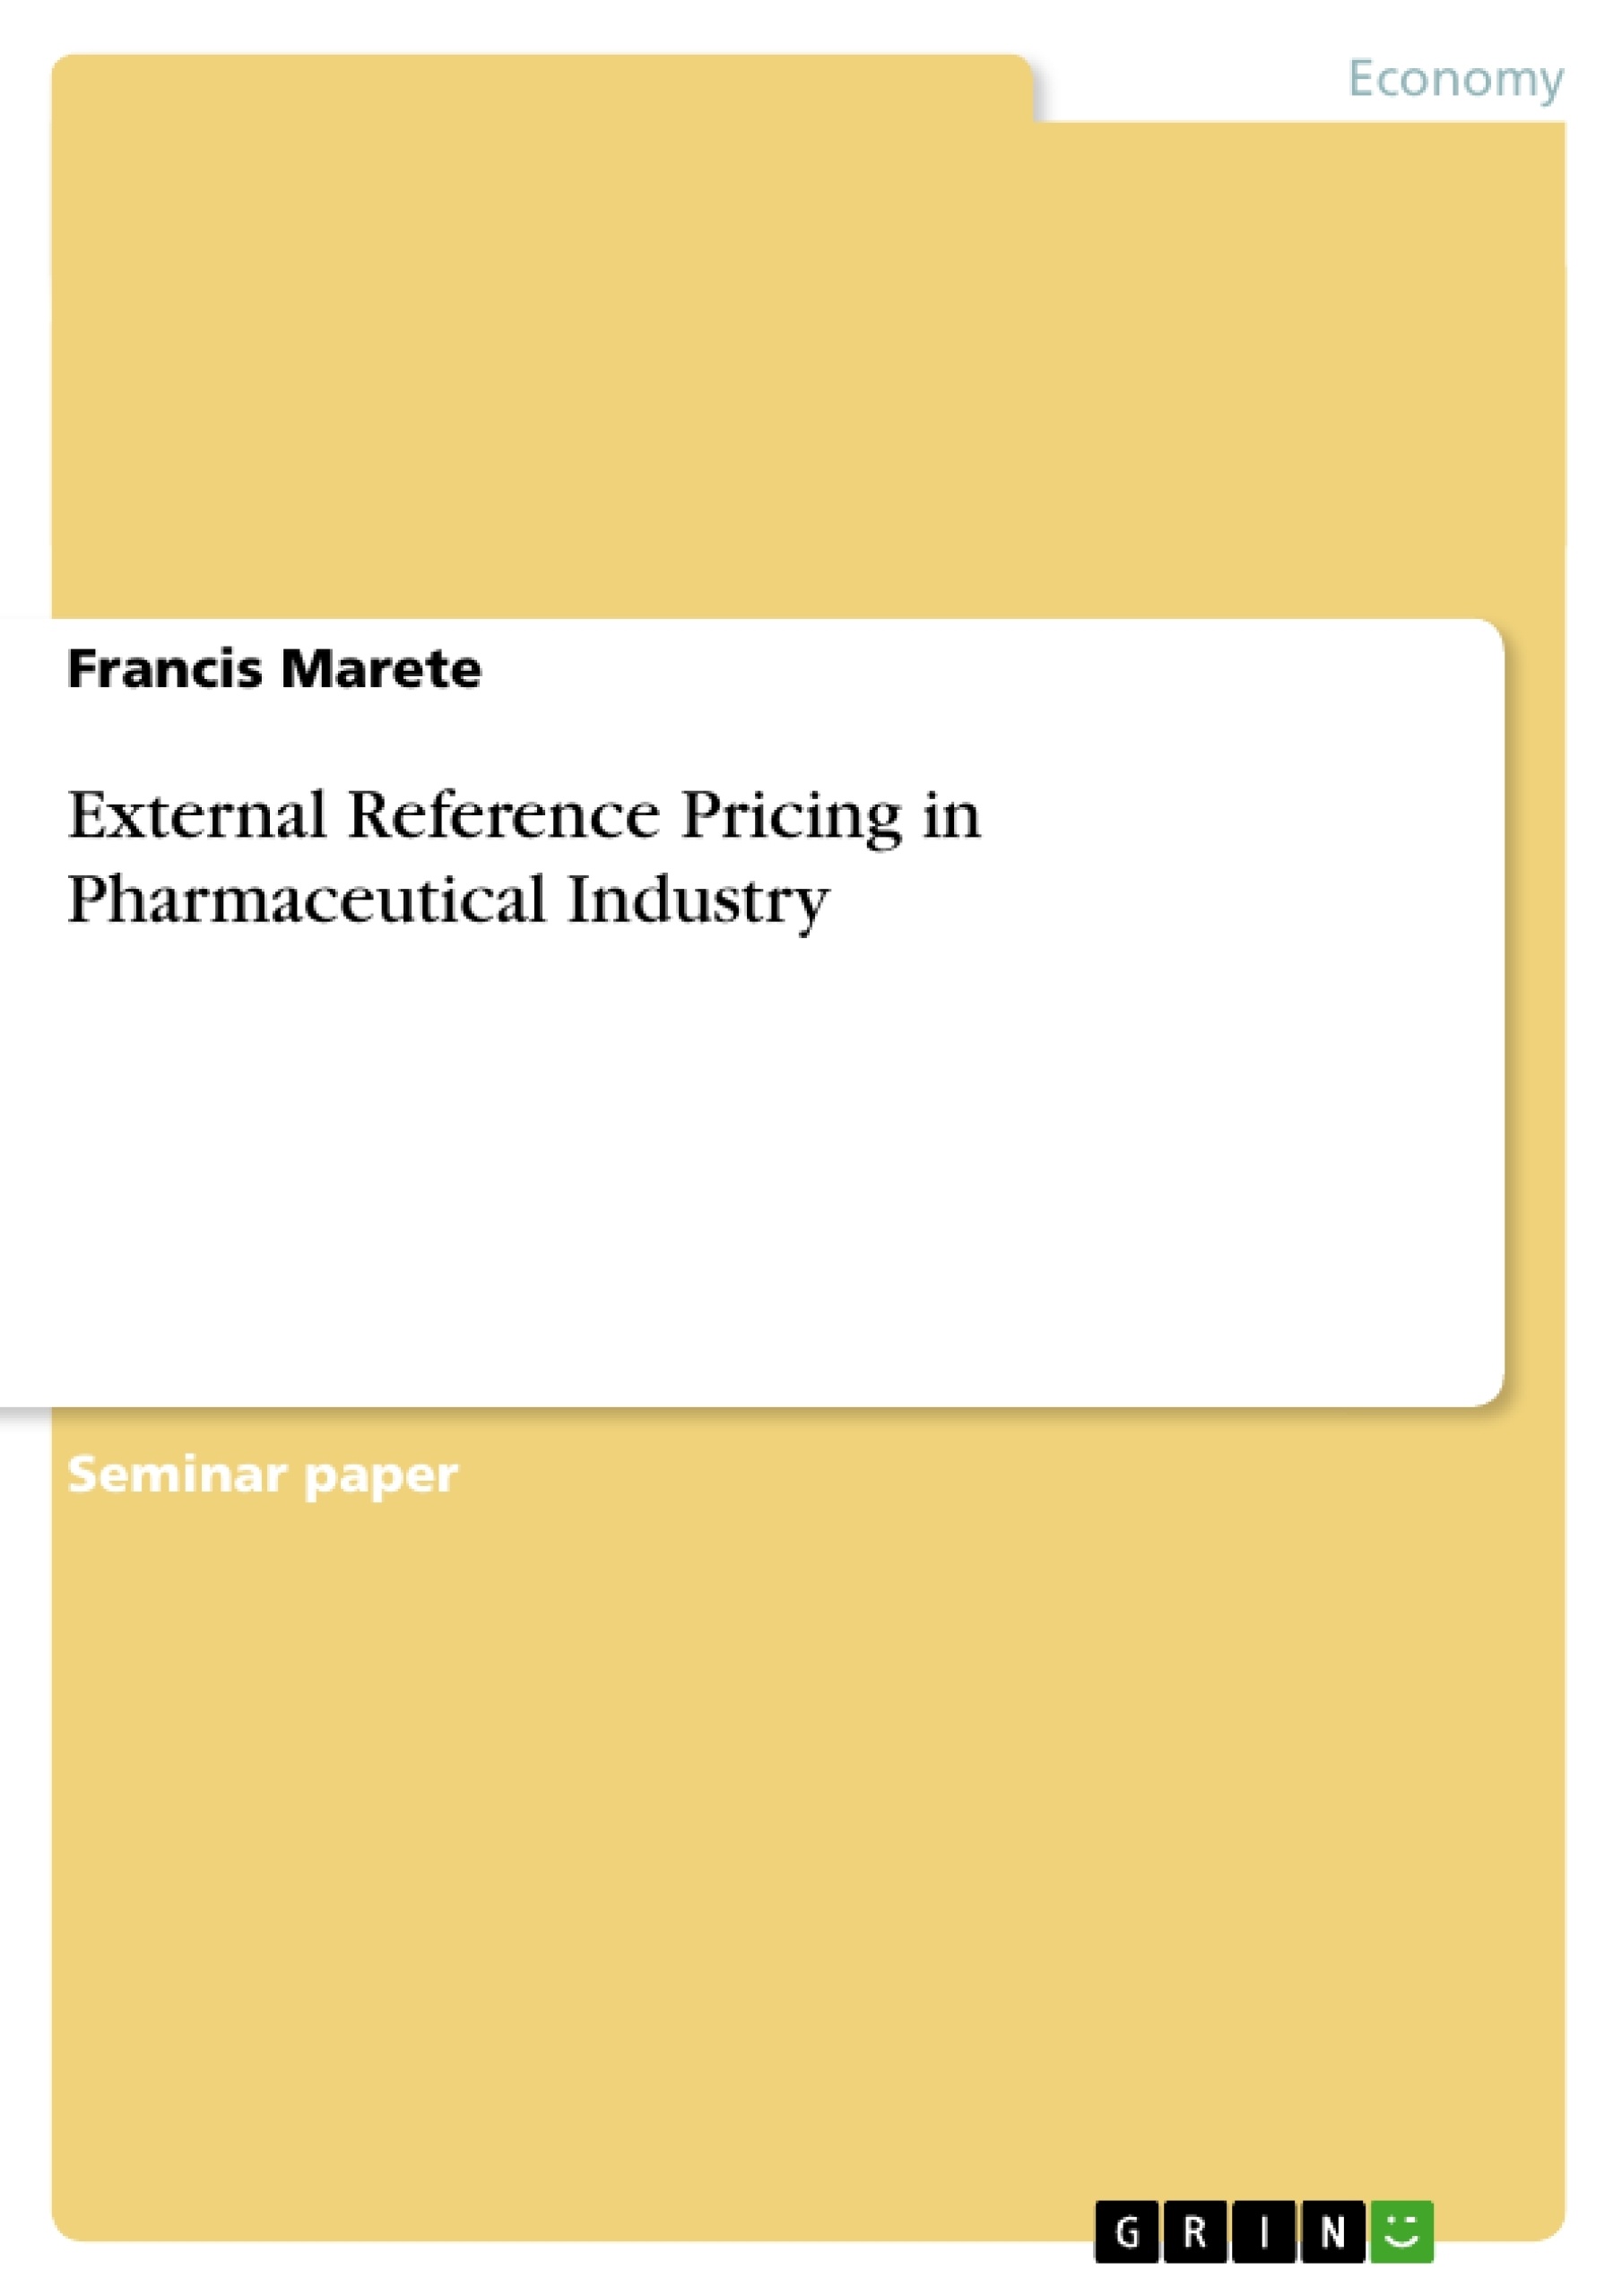 Title: External Reference Pricing in Pharmaceutical Industry